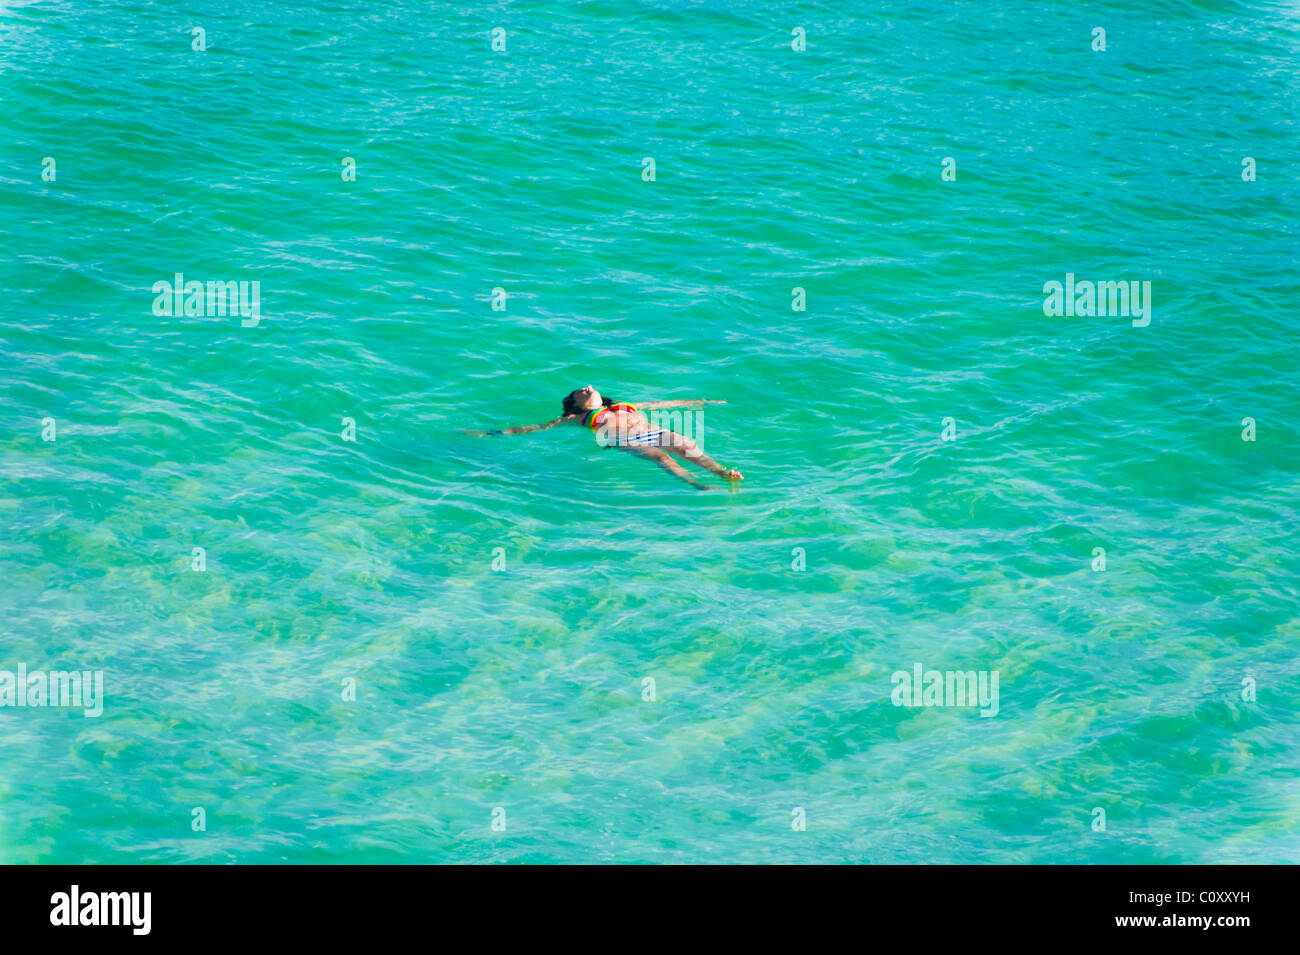 Woman swimming in Caribbean waters, Barbados, clear turquoise sea and sunshine Stock Photo